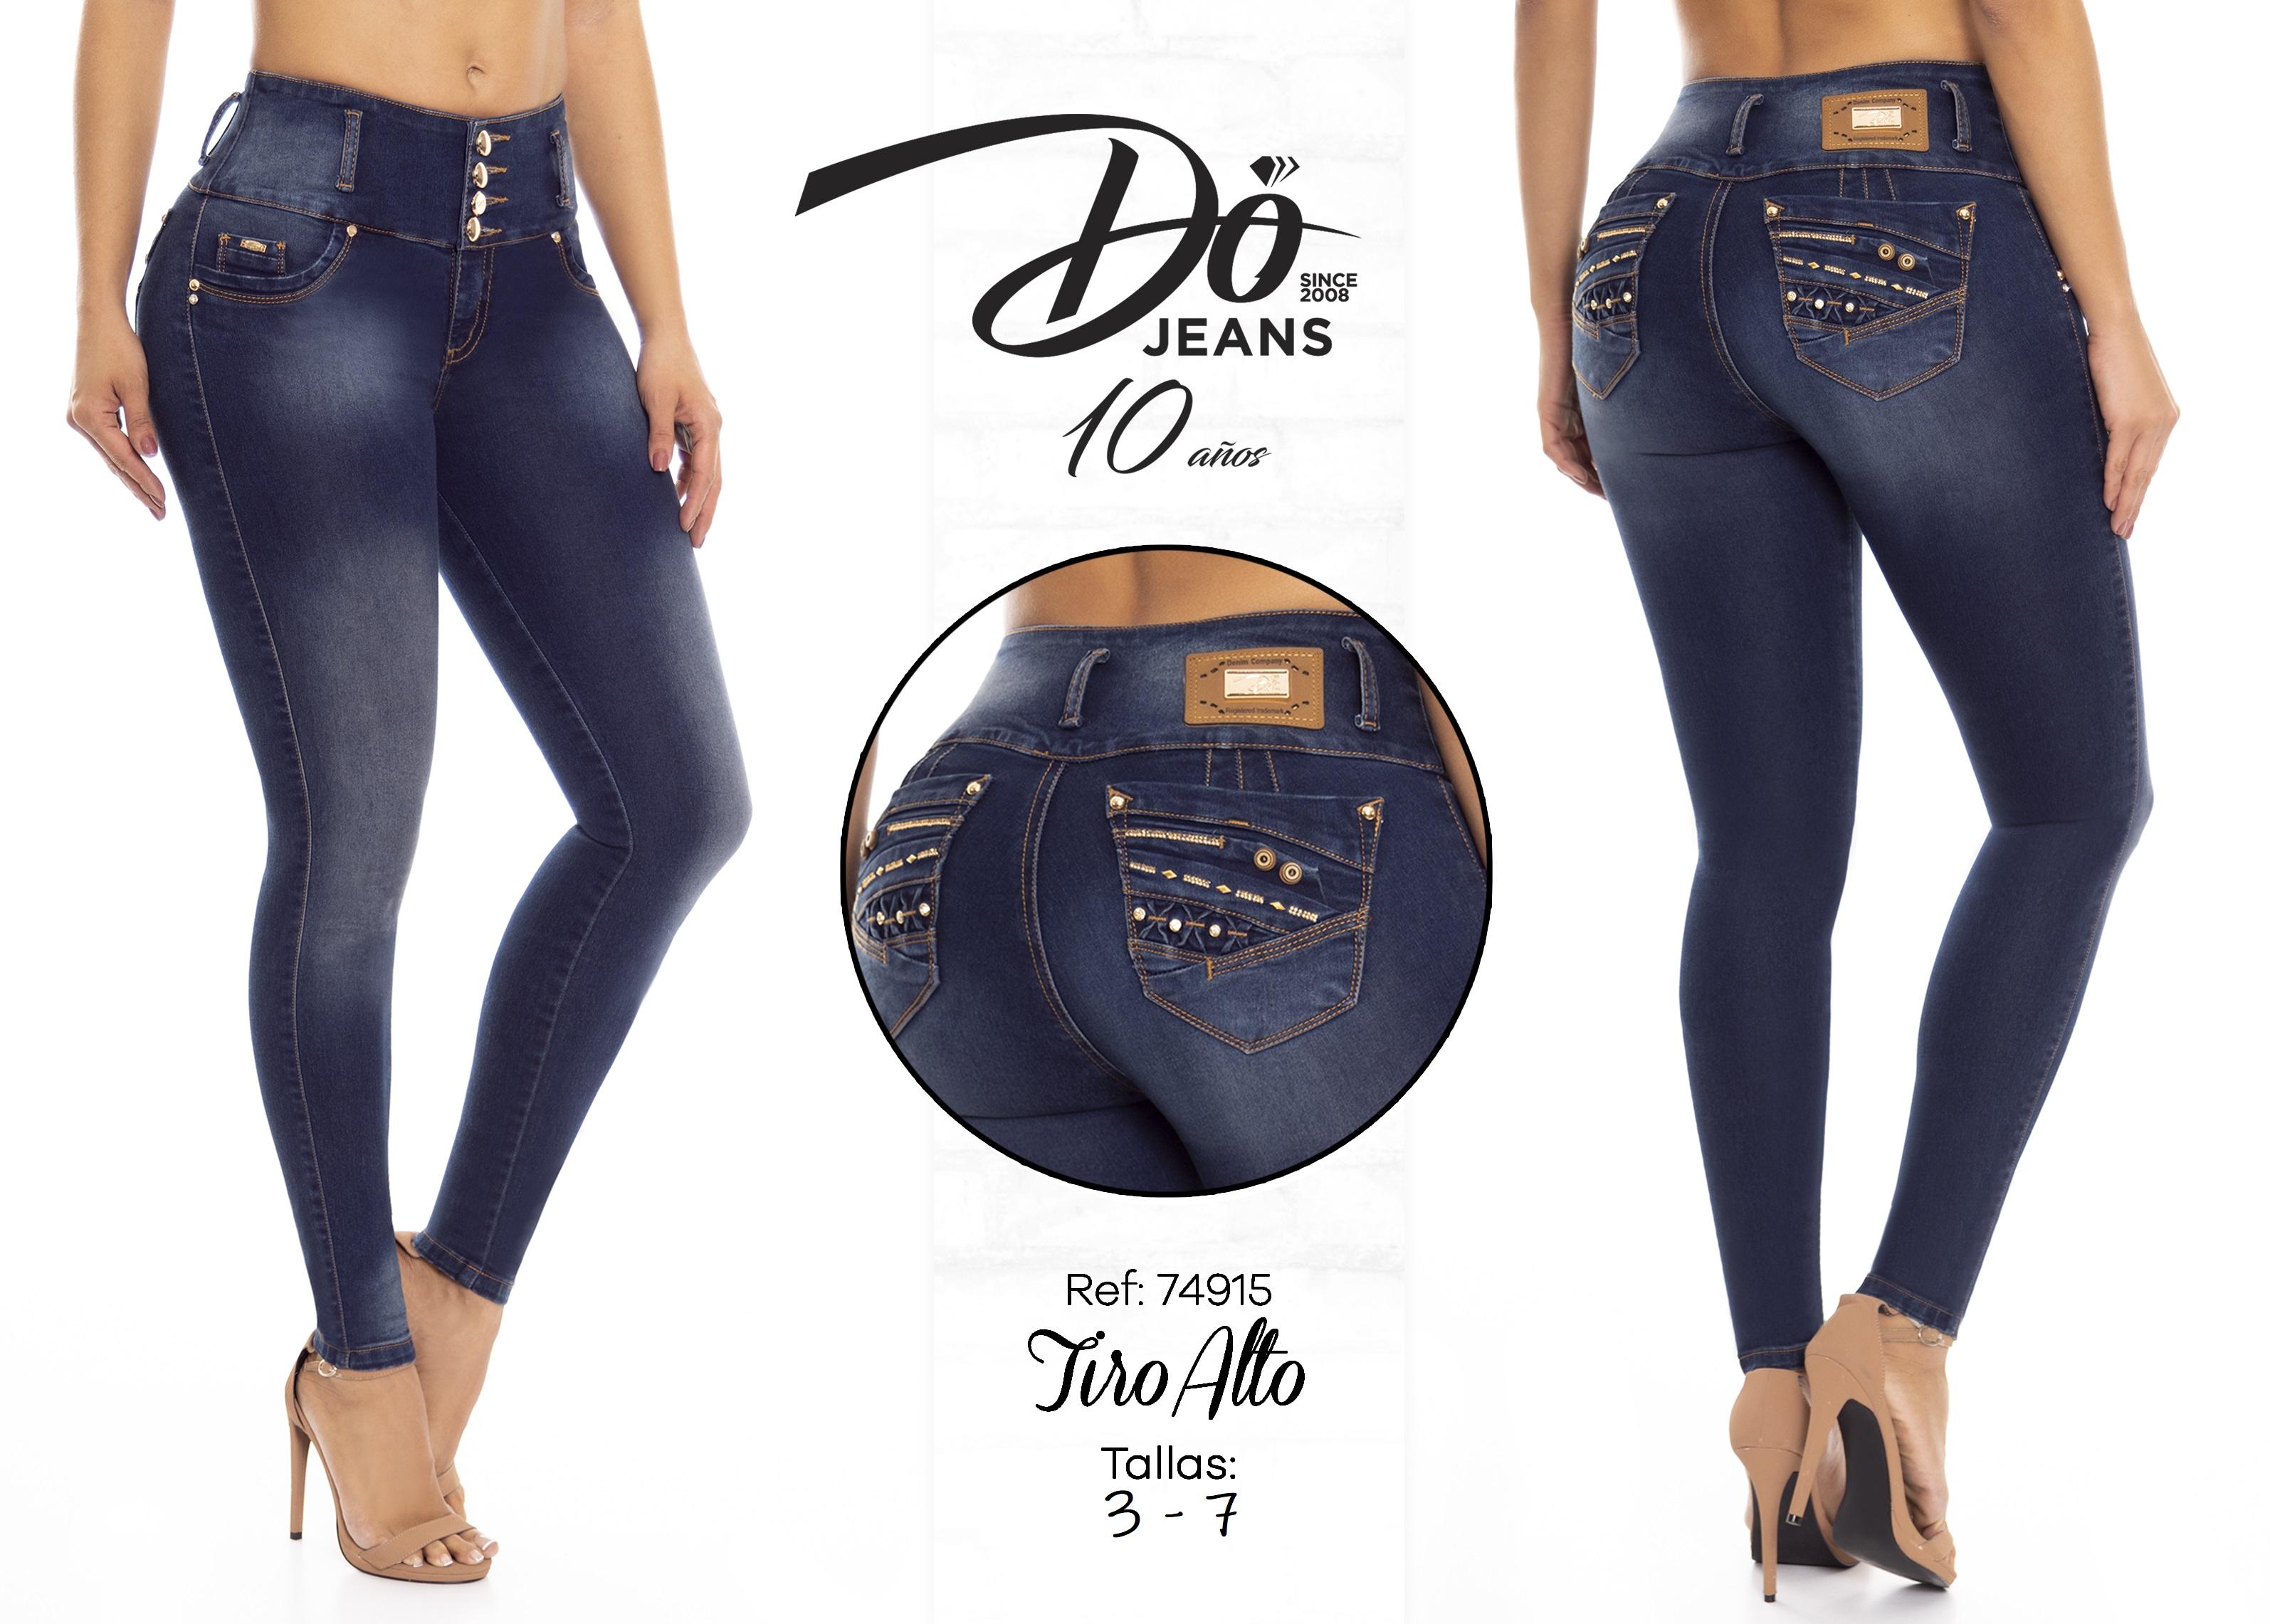 Jeans Levantacola Colombiano - Ref. 248 -74915 D